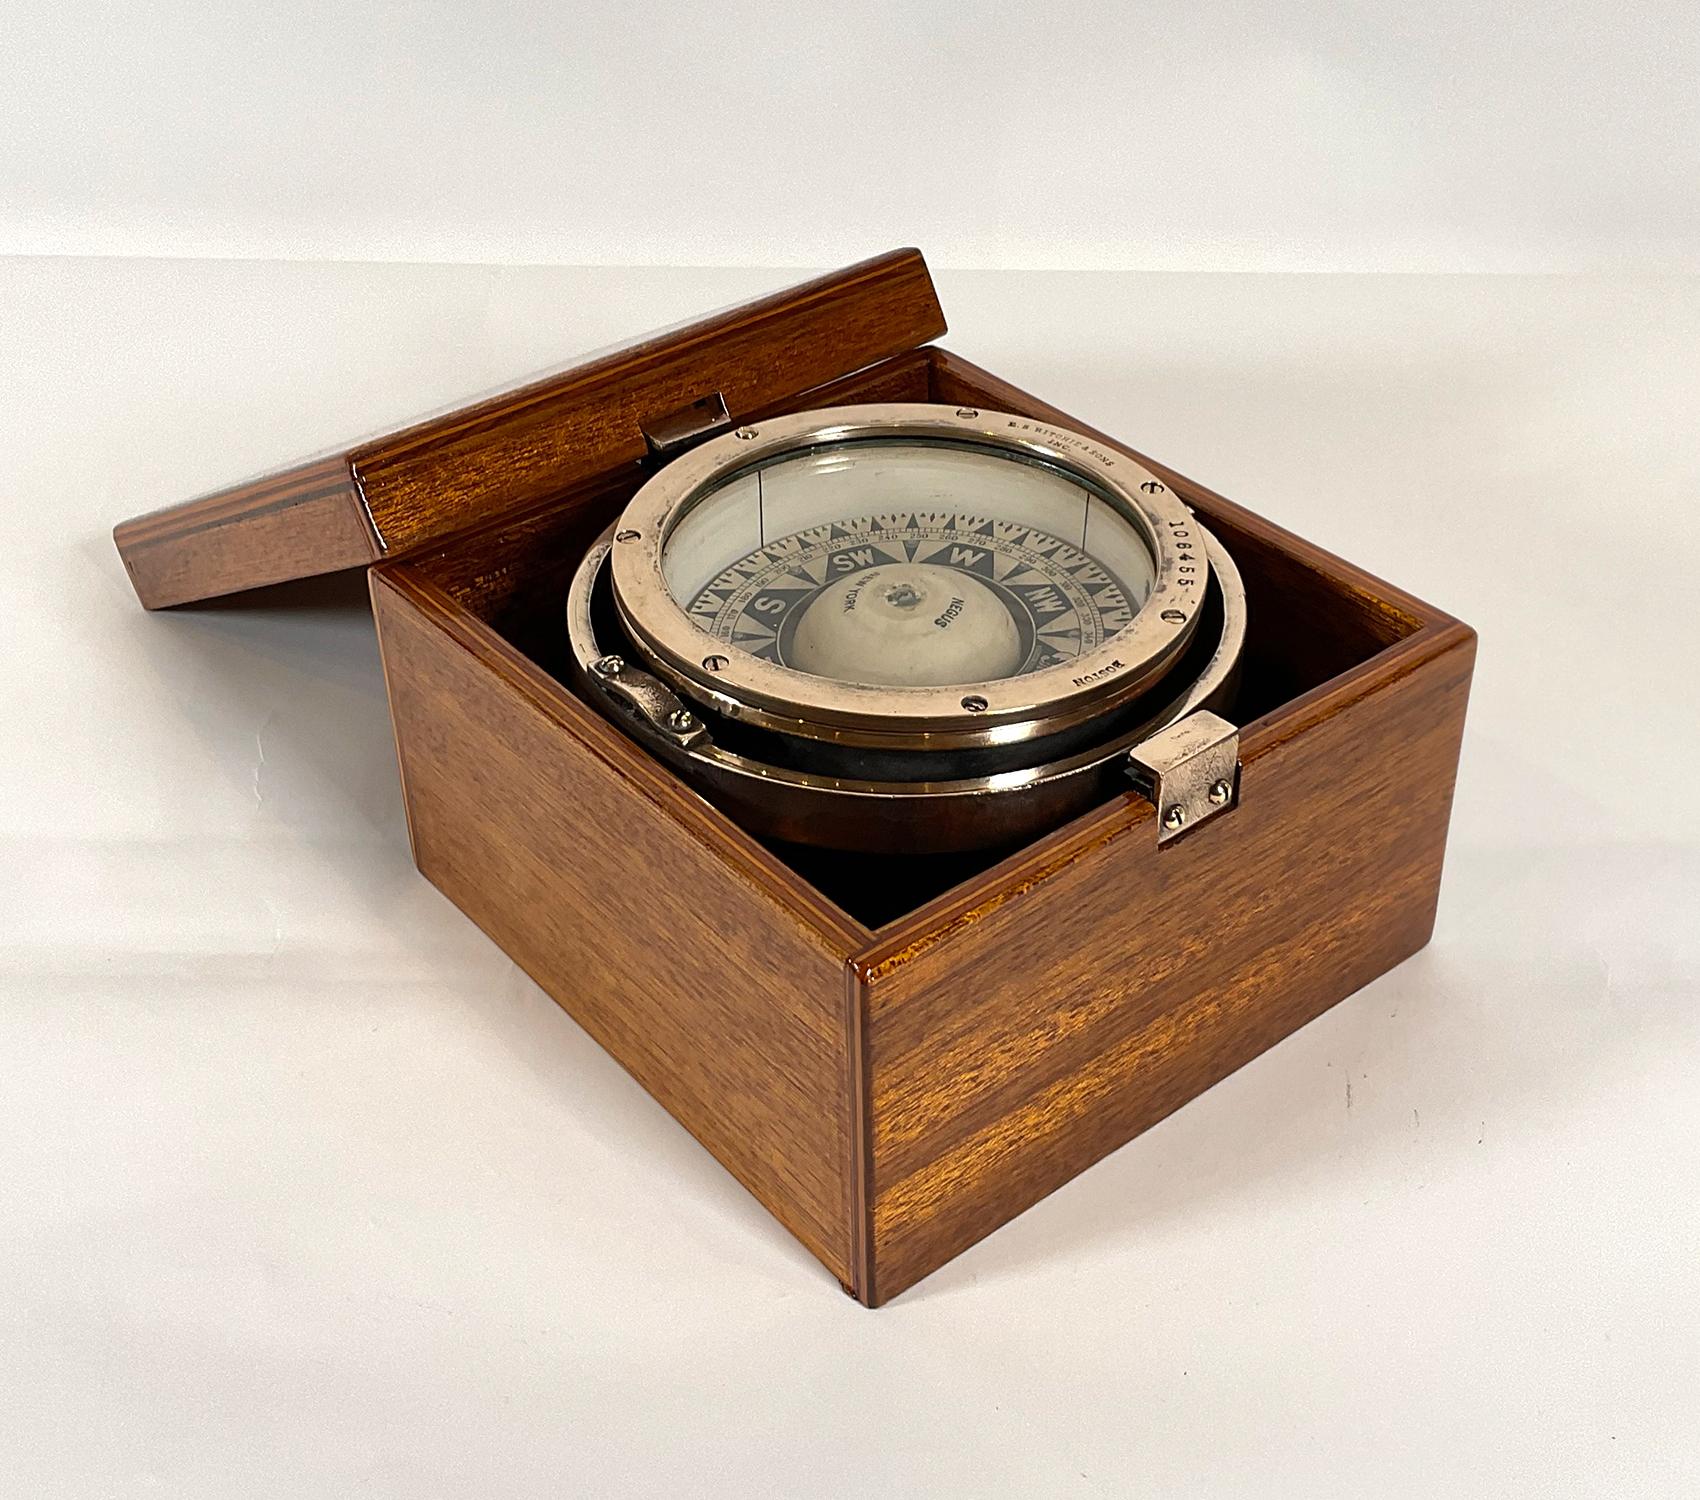 Highly polished Gimballed boat compass by E.S. Ritchie & Sons, Boston Mass. With compass card bearing name of ships chandler Negus of New York. The mahogany box has a fresh coat of varnish. Choice maritime relic.

Weight: 7 LBS
Overall